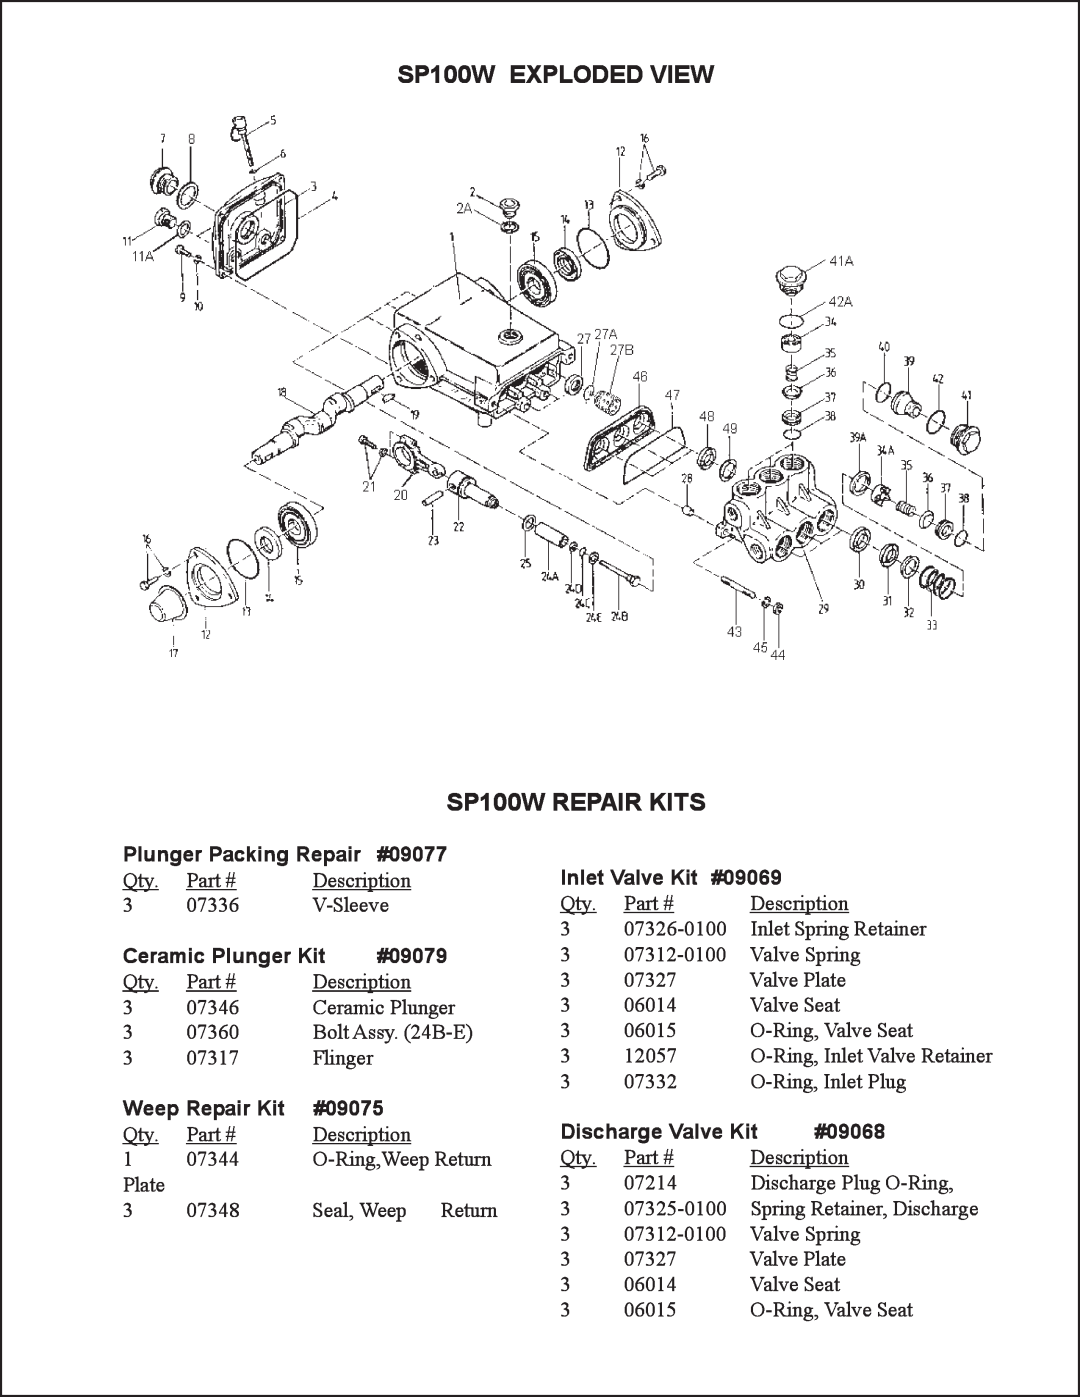 Giant SP100W EXPLODED VIEW SP100W REPAIR KITS, Plunger Packing Repair, #09077, Inlet Valve Kit #09069, #09079, #09075 